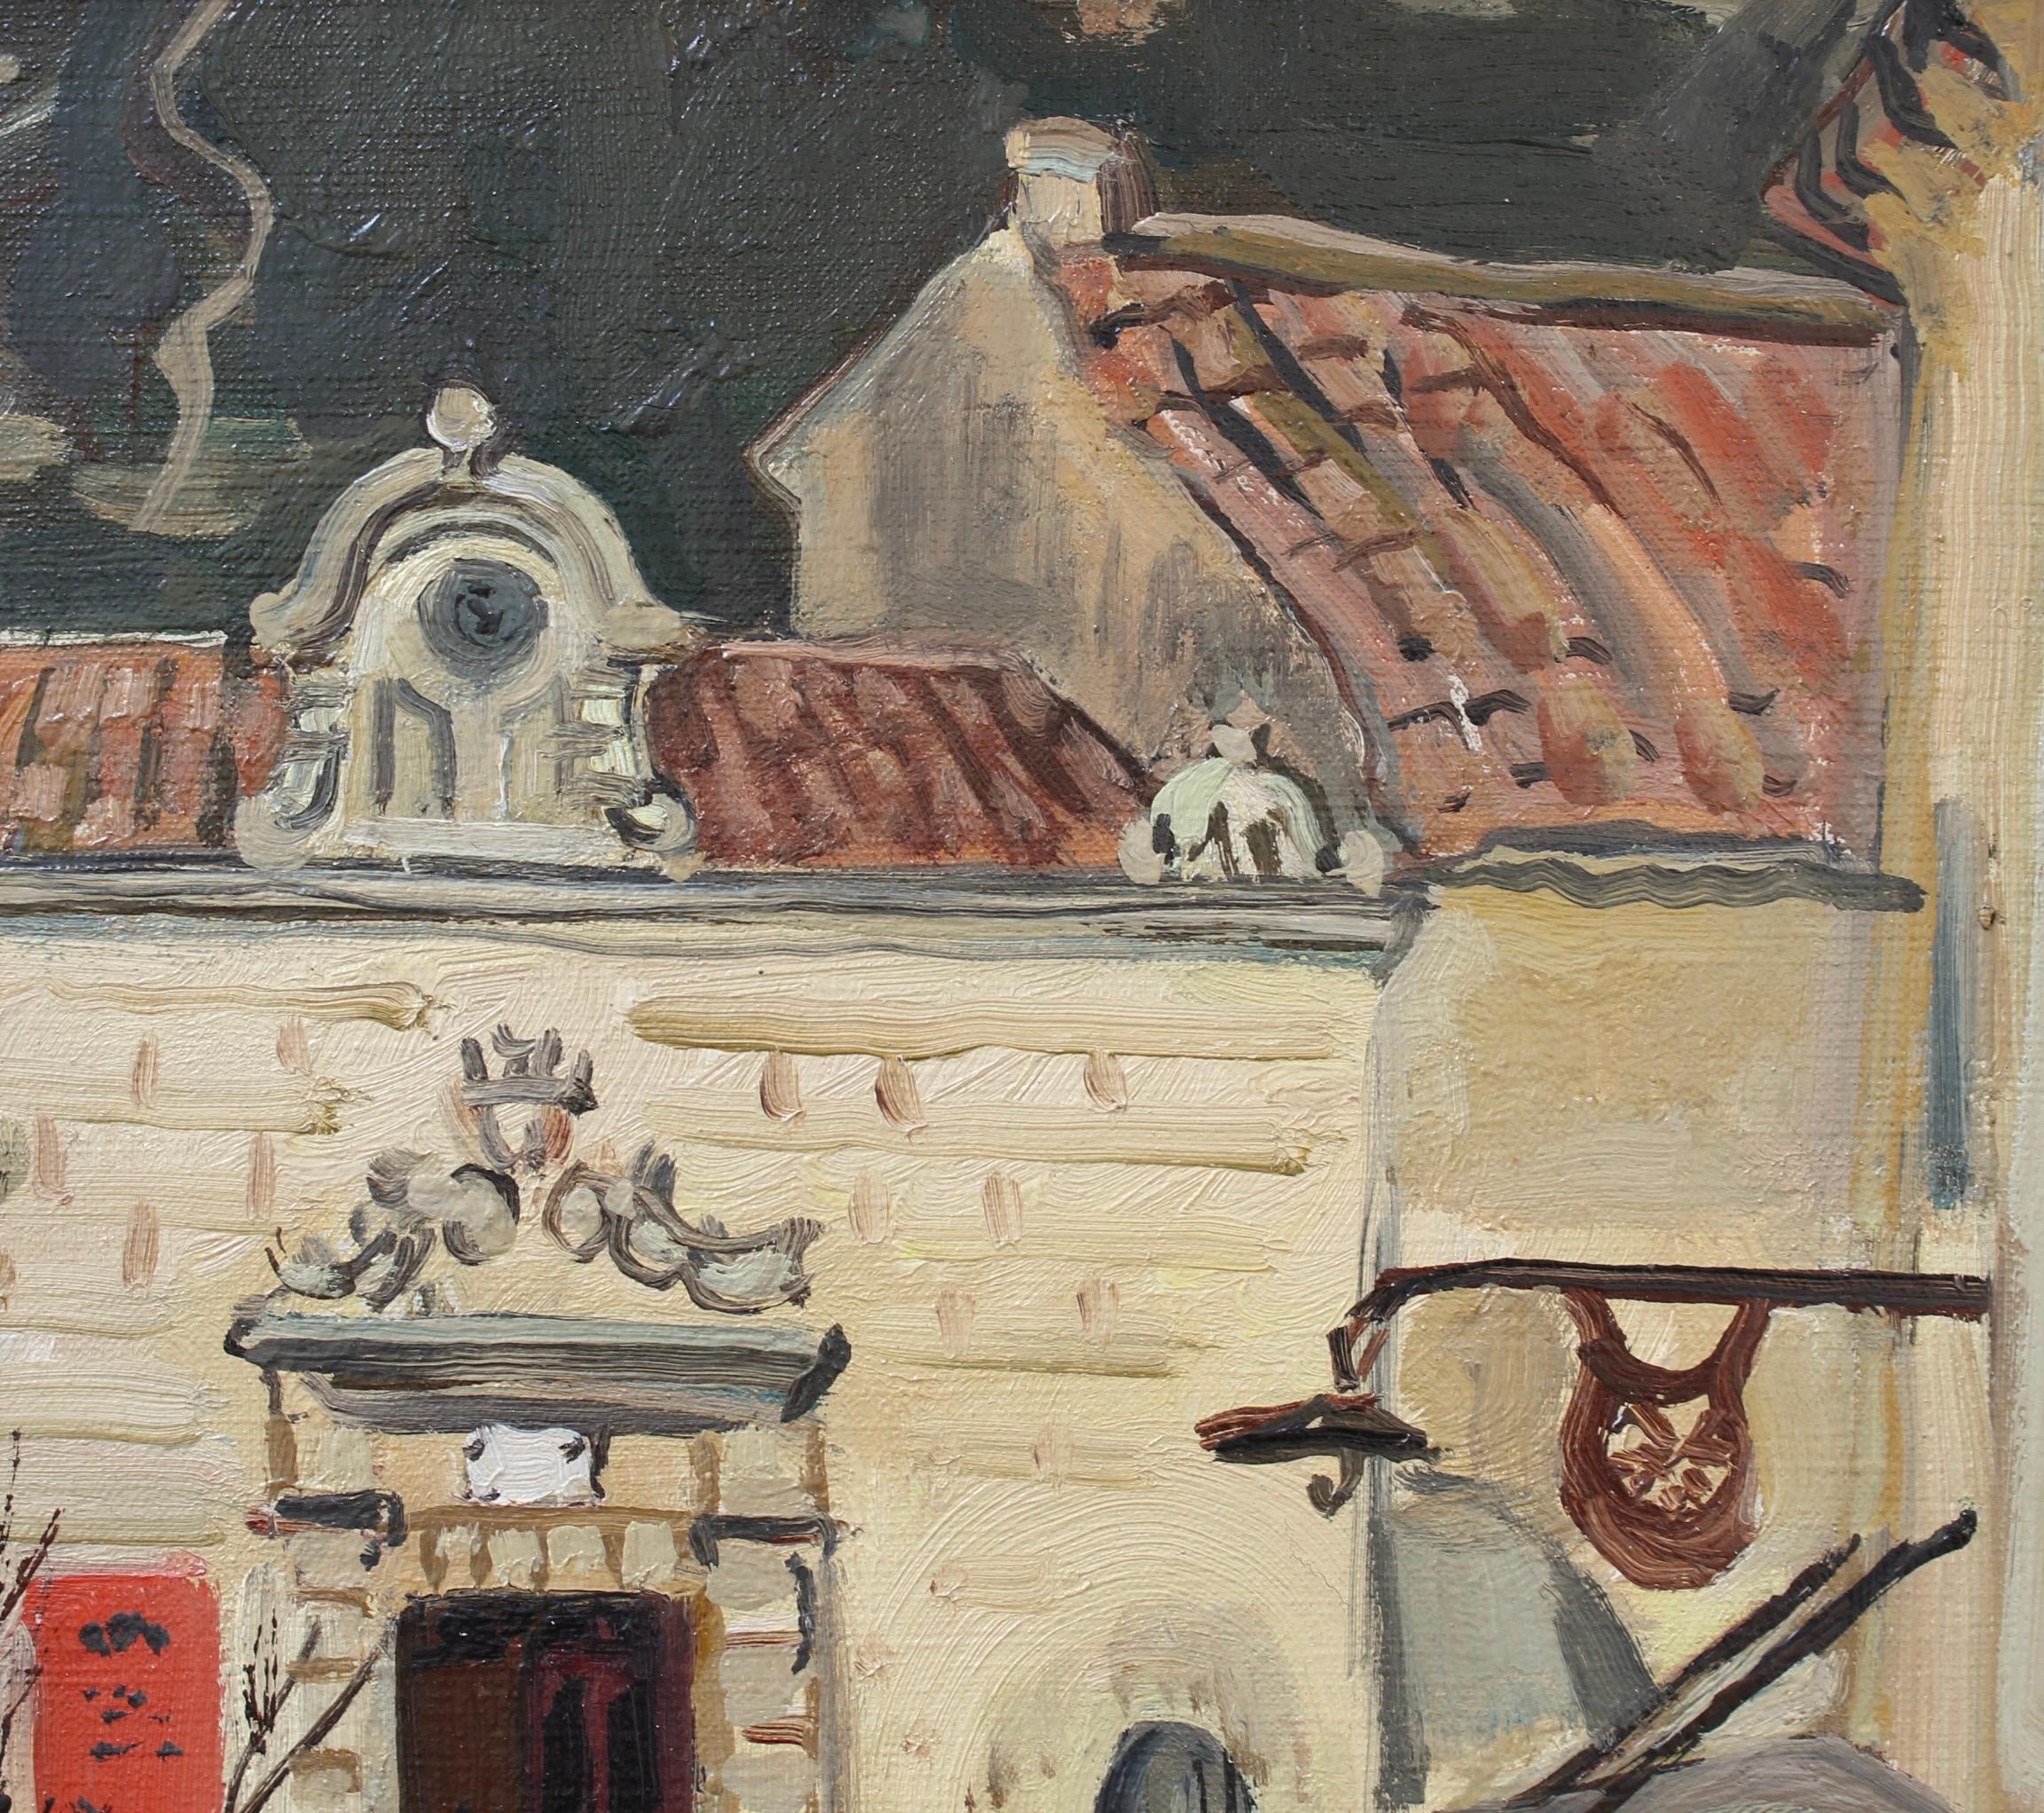 'The Town Hall of Les Baux-de-Provence', oil on canvas, by Yves Brayer (1946). Having spent several months a year in Provence, the artist created dozens of works of Les Baux-de-Provence and surrounds. This serene work depicts the former town hall on